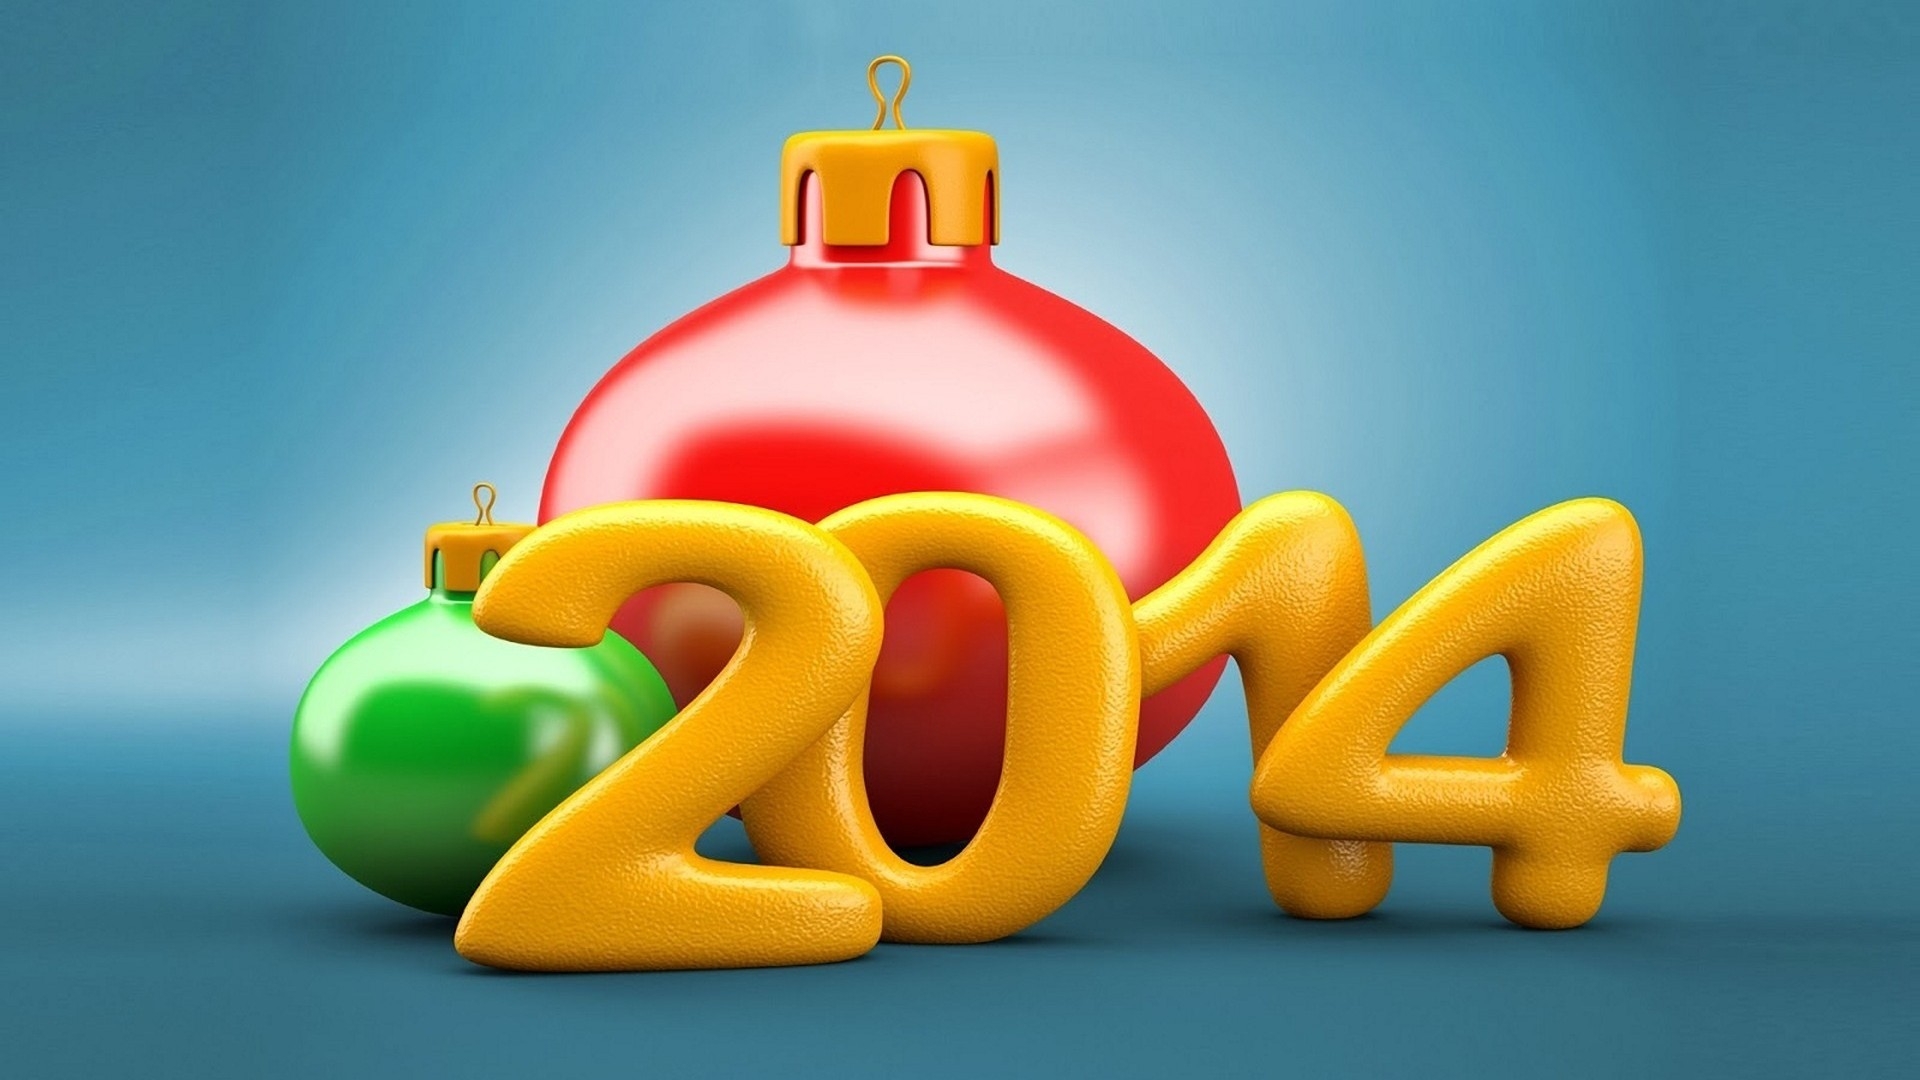 New Year 2014 for 1920 x 1080 HDTV 1080p resolution